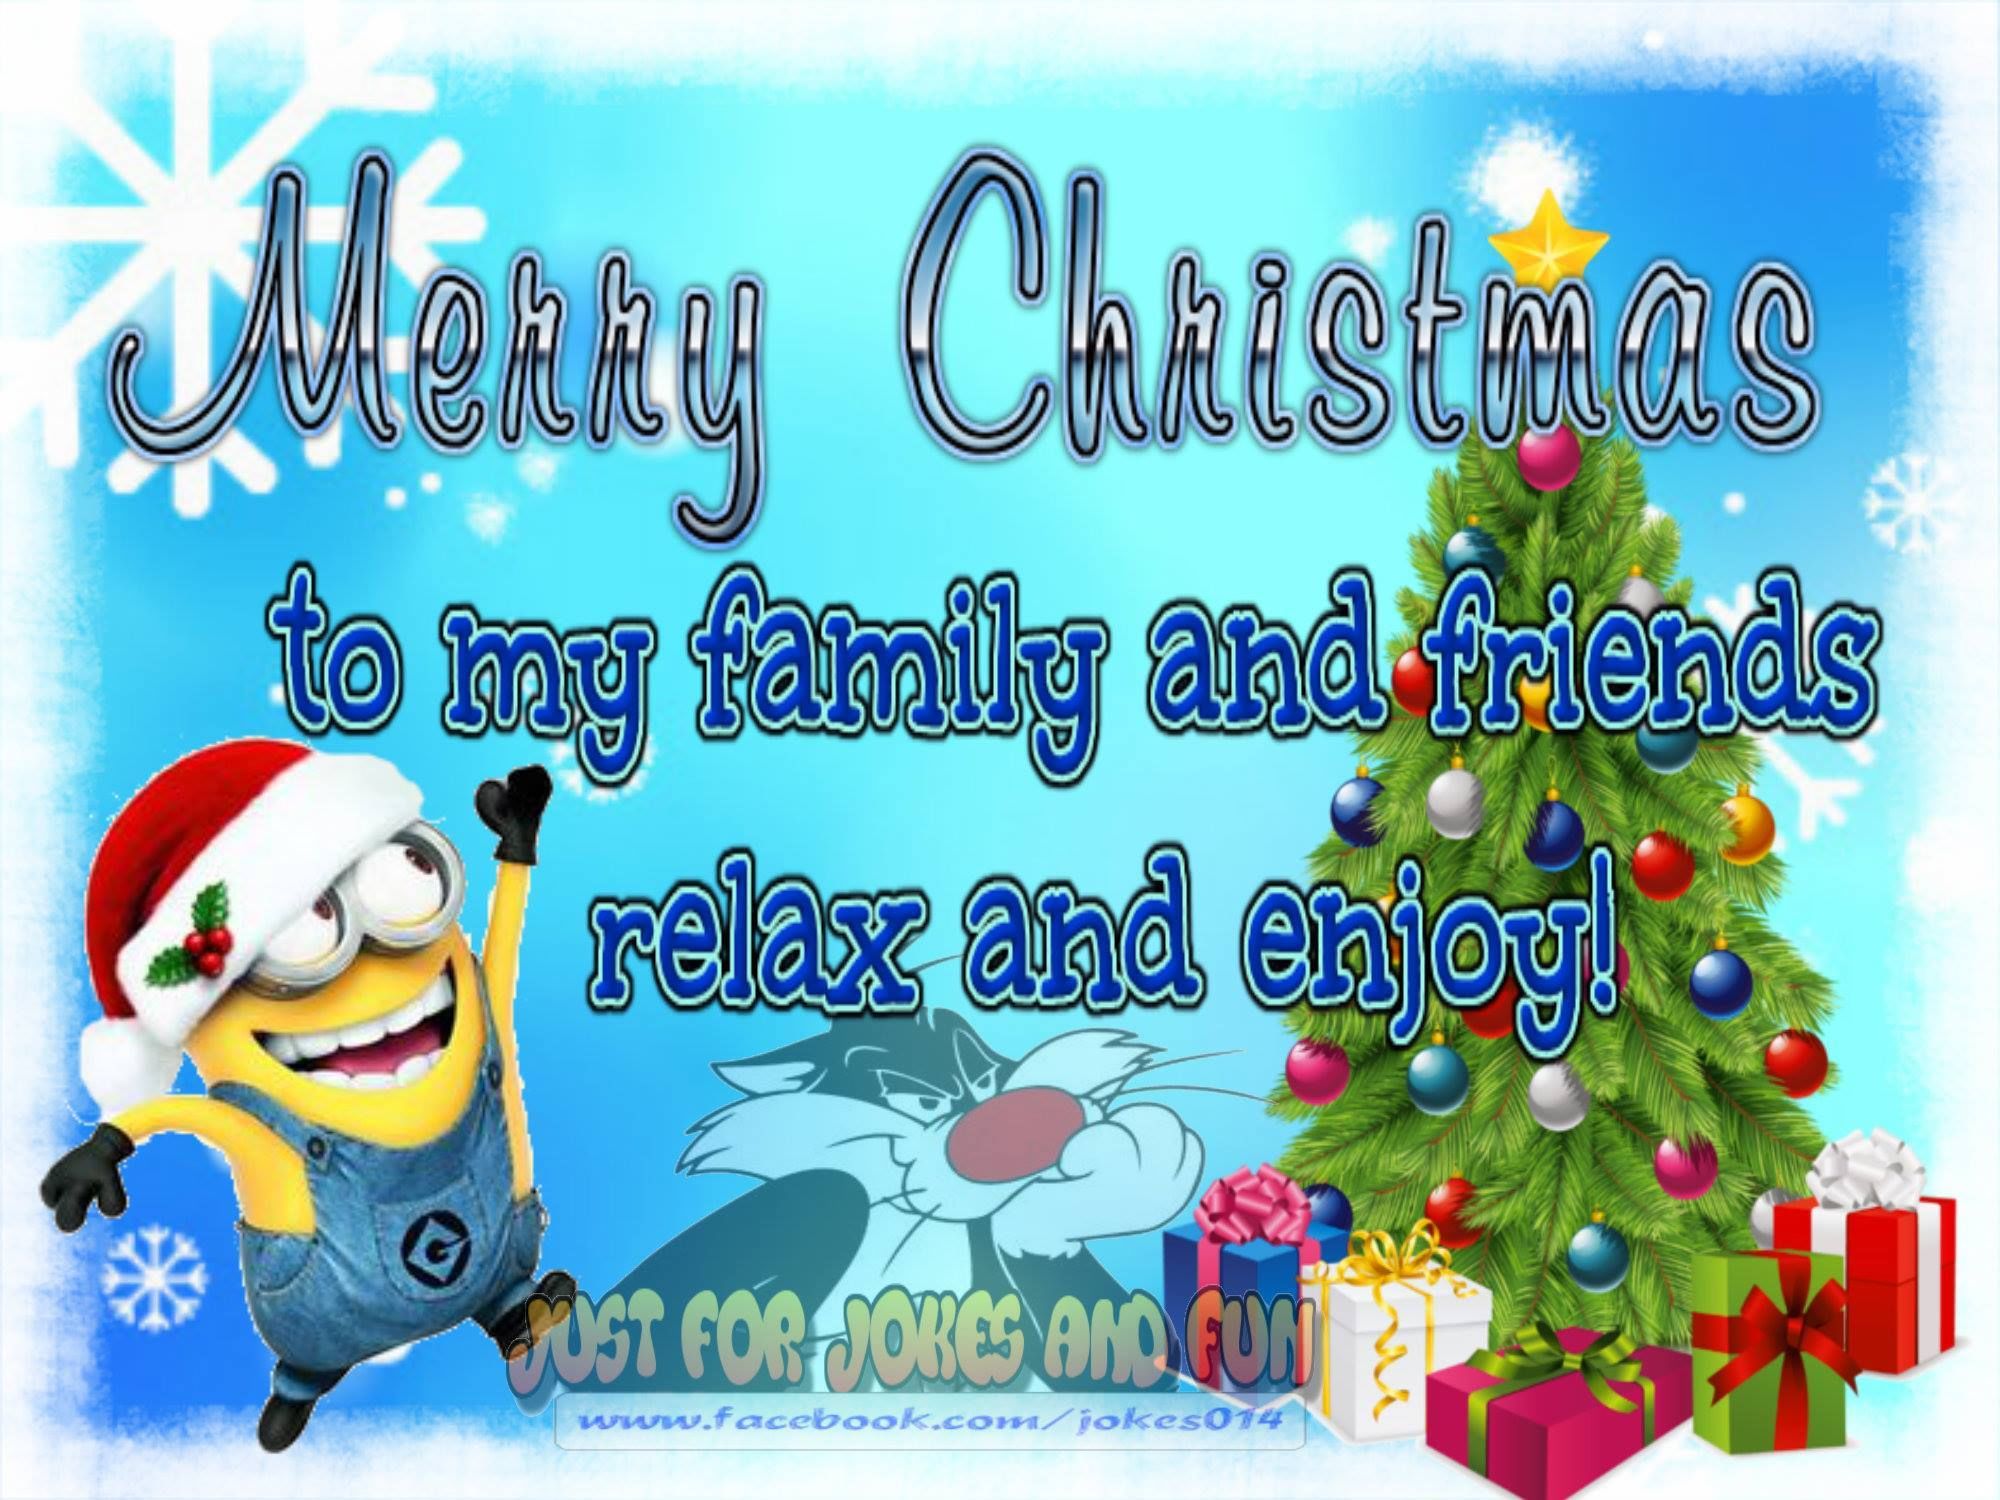 Christmas Messages For Friends And Family By Wishesquotes